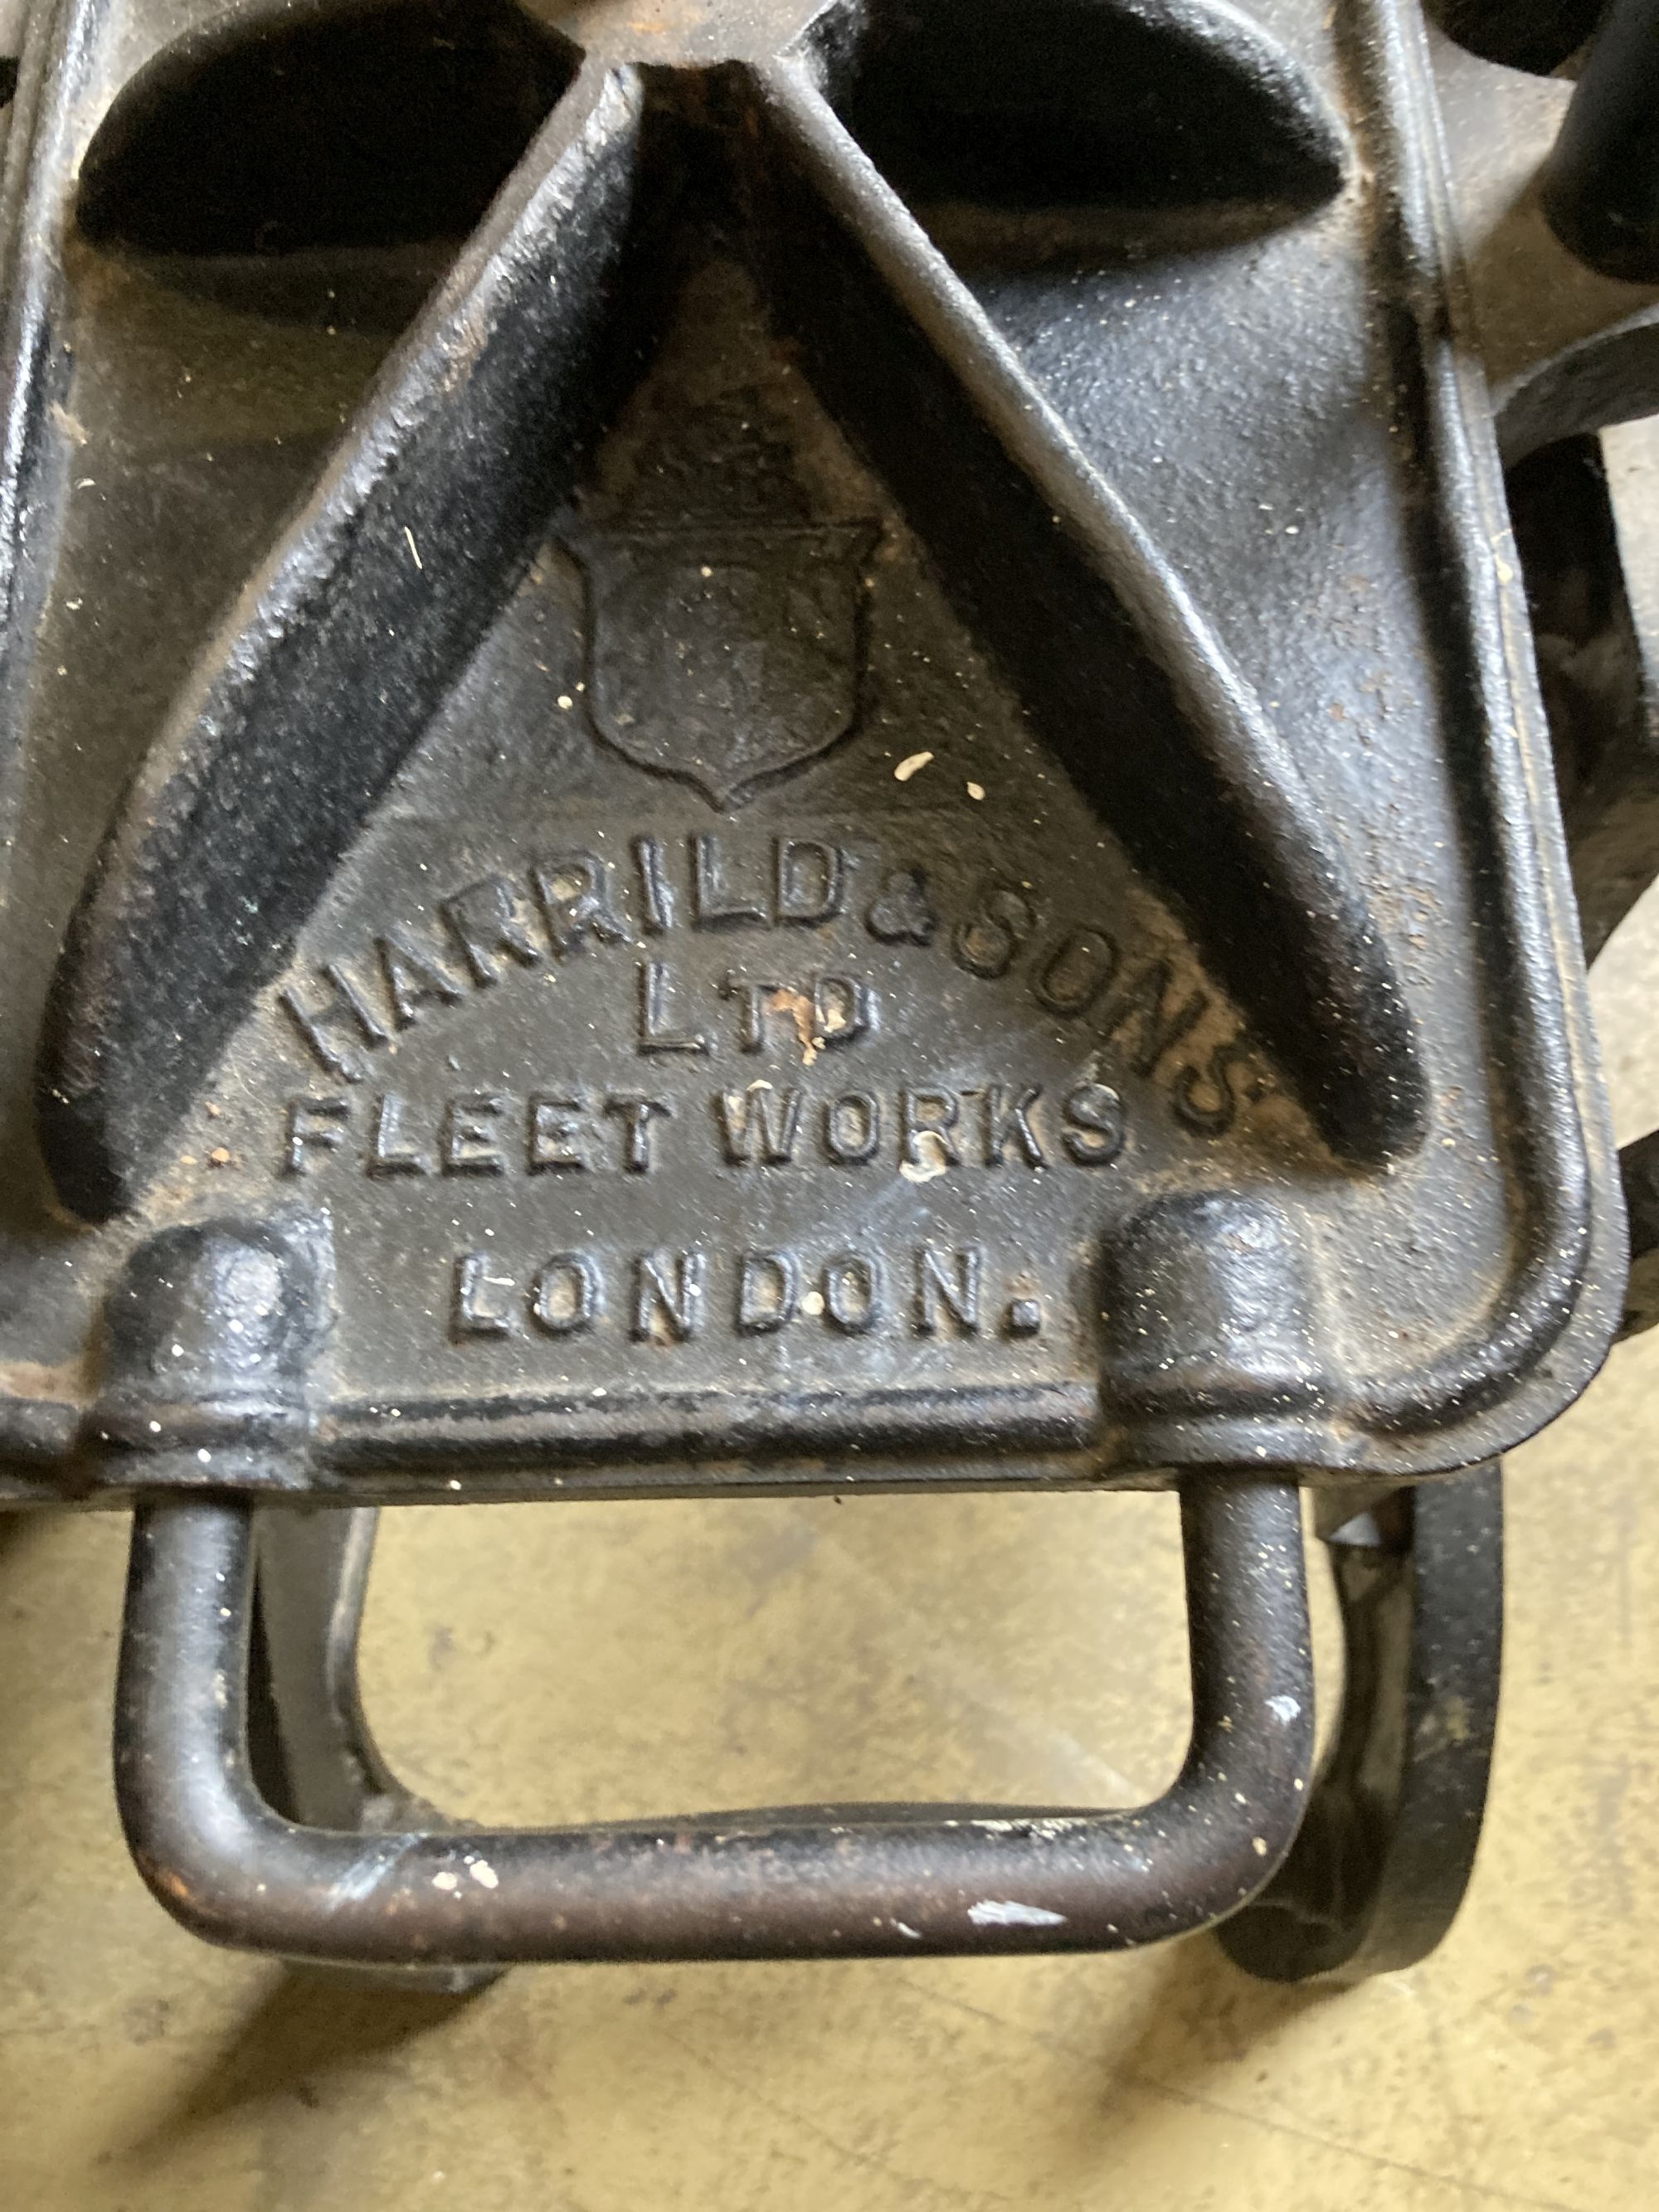 A Harrild and Sons cast iron printers press, with later brass plaque - F.W. Woodruff & Co. Ltd., width 44cm, depth 74cm, height 86cm